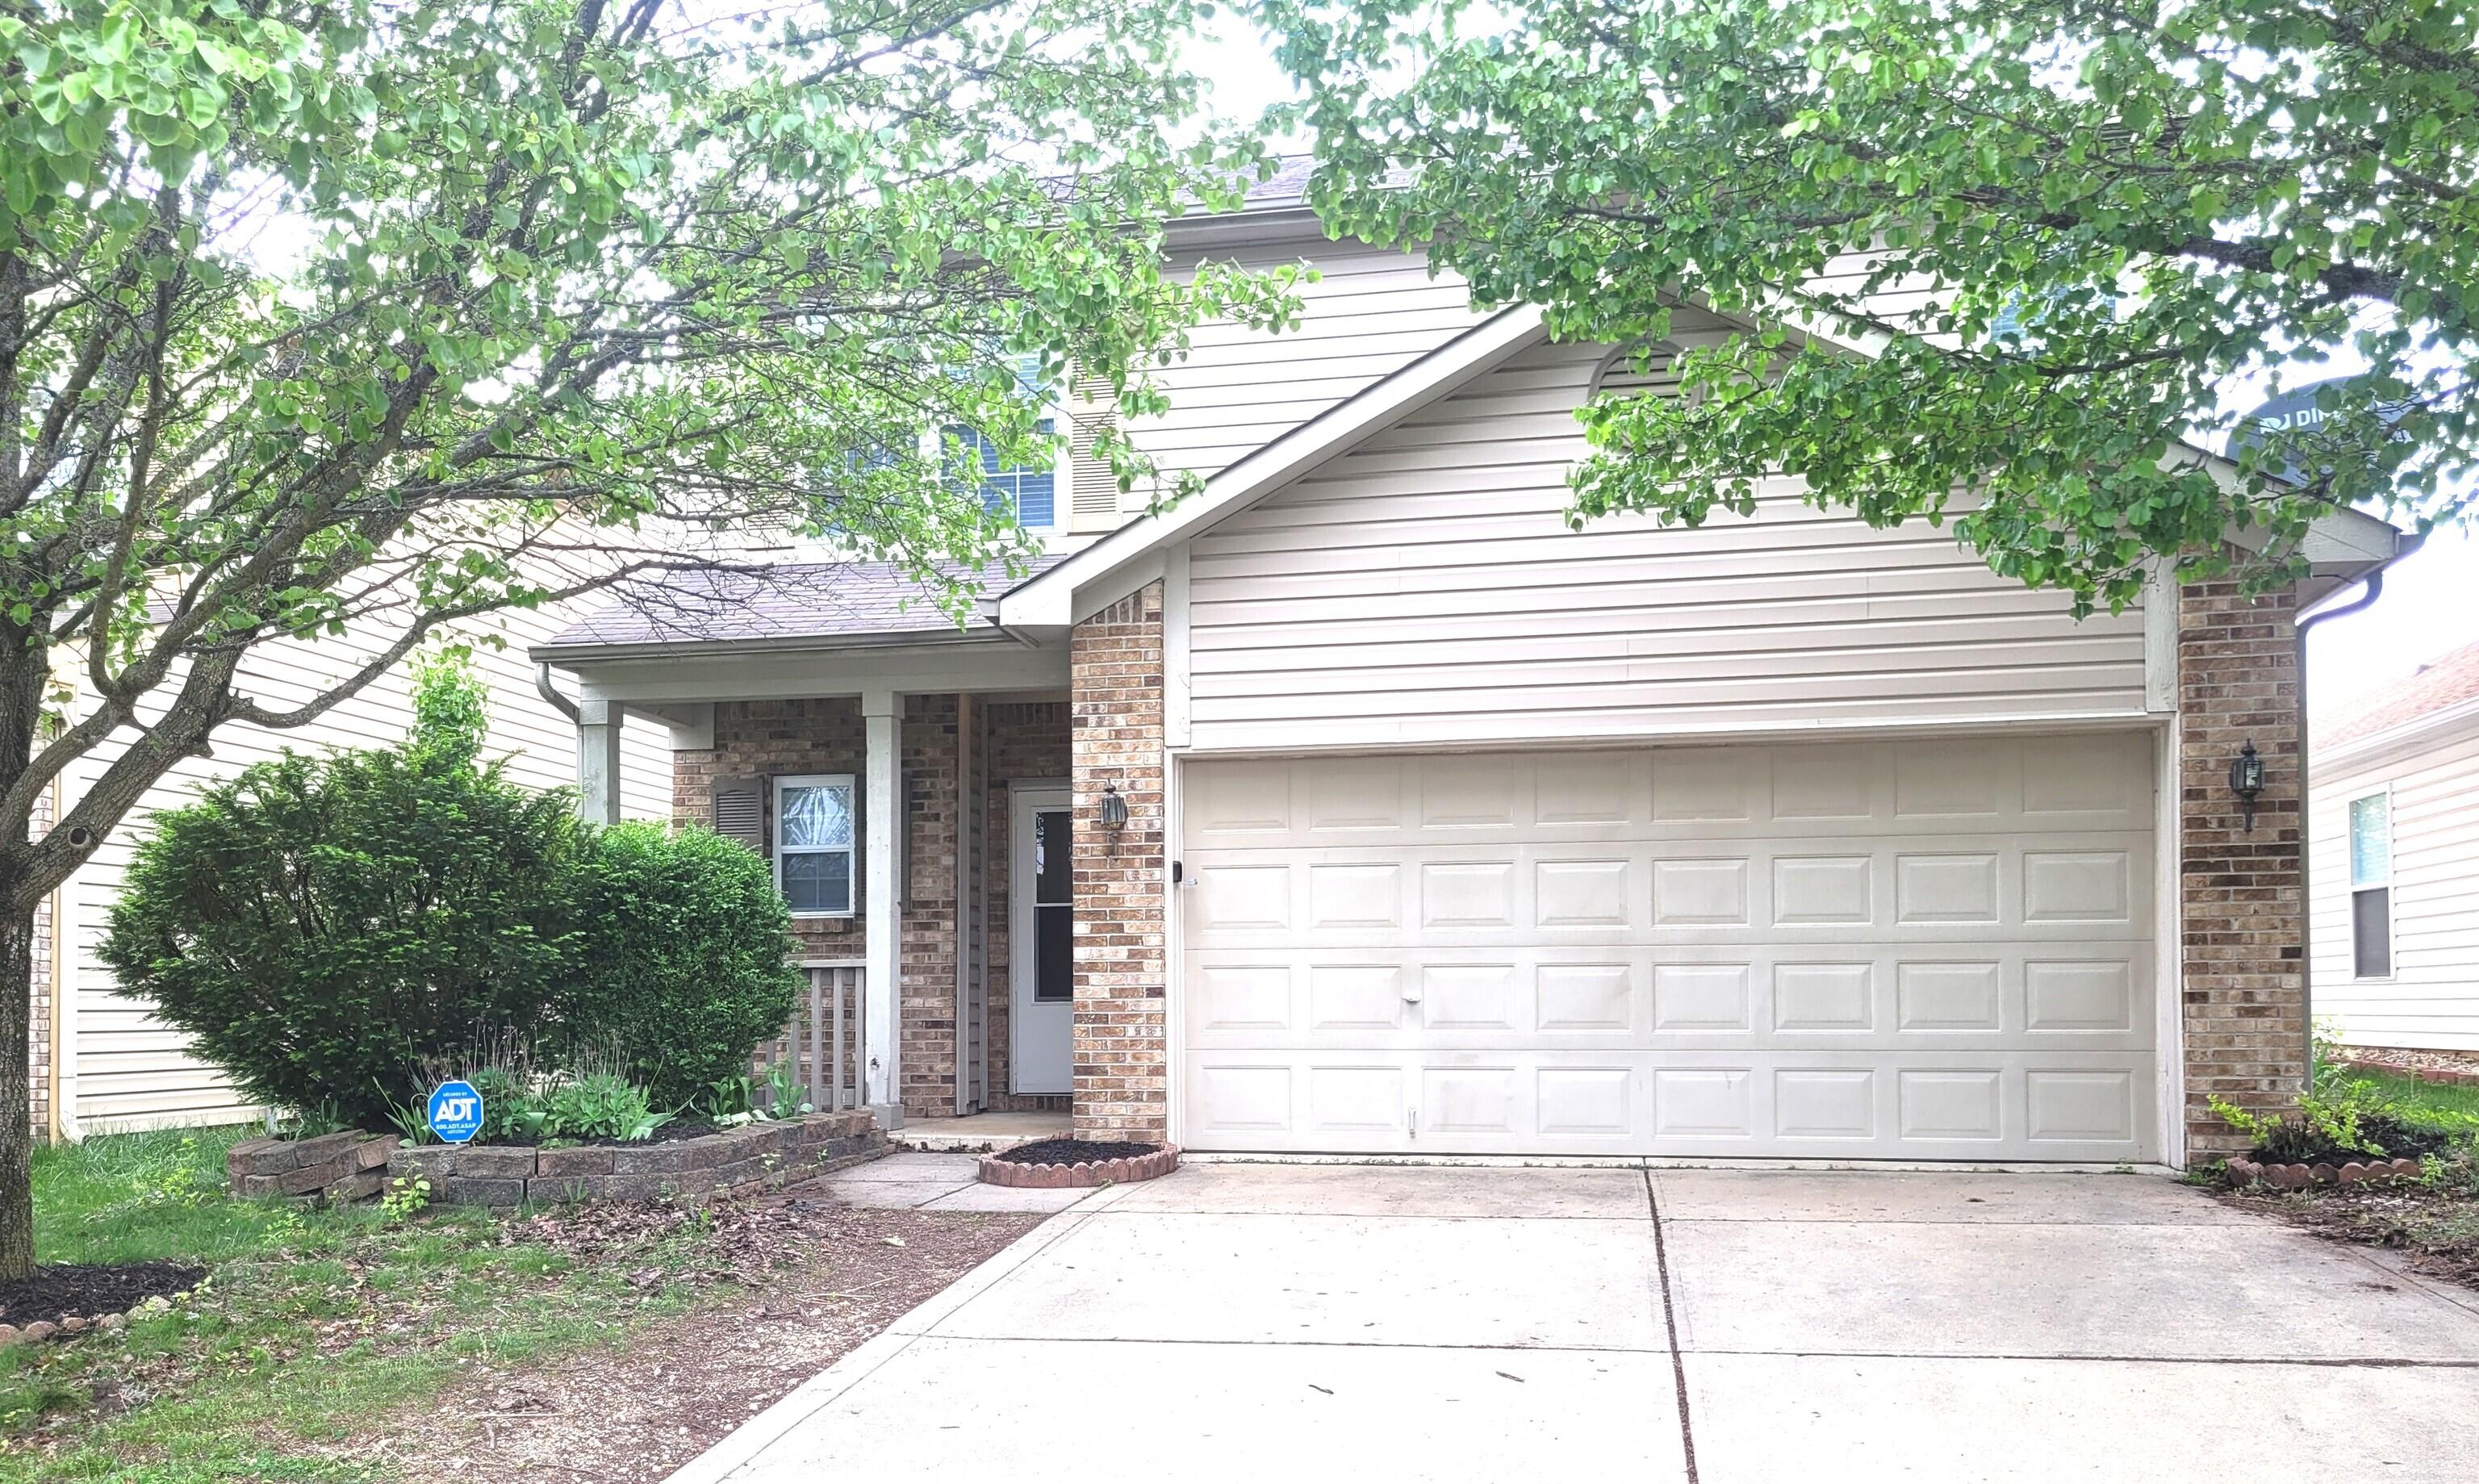 Photo one of 2624 Mingo Ln Indianapolis IN 46217 | MLS 21976964